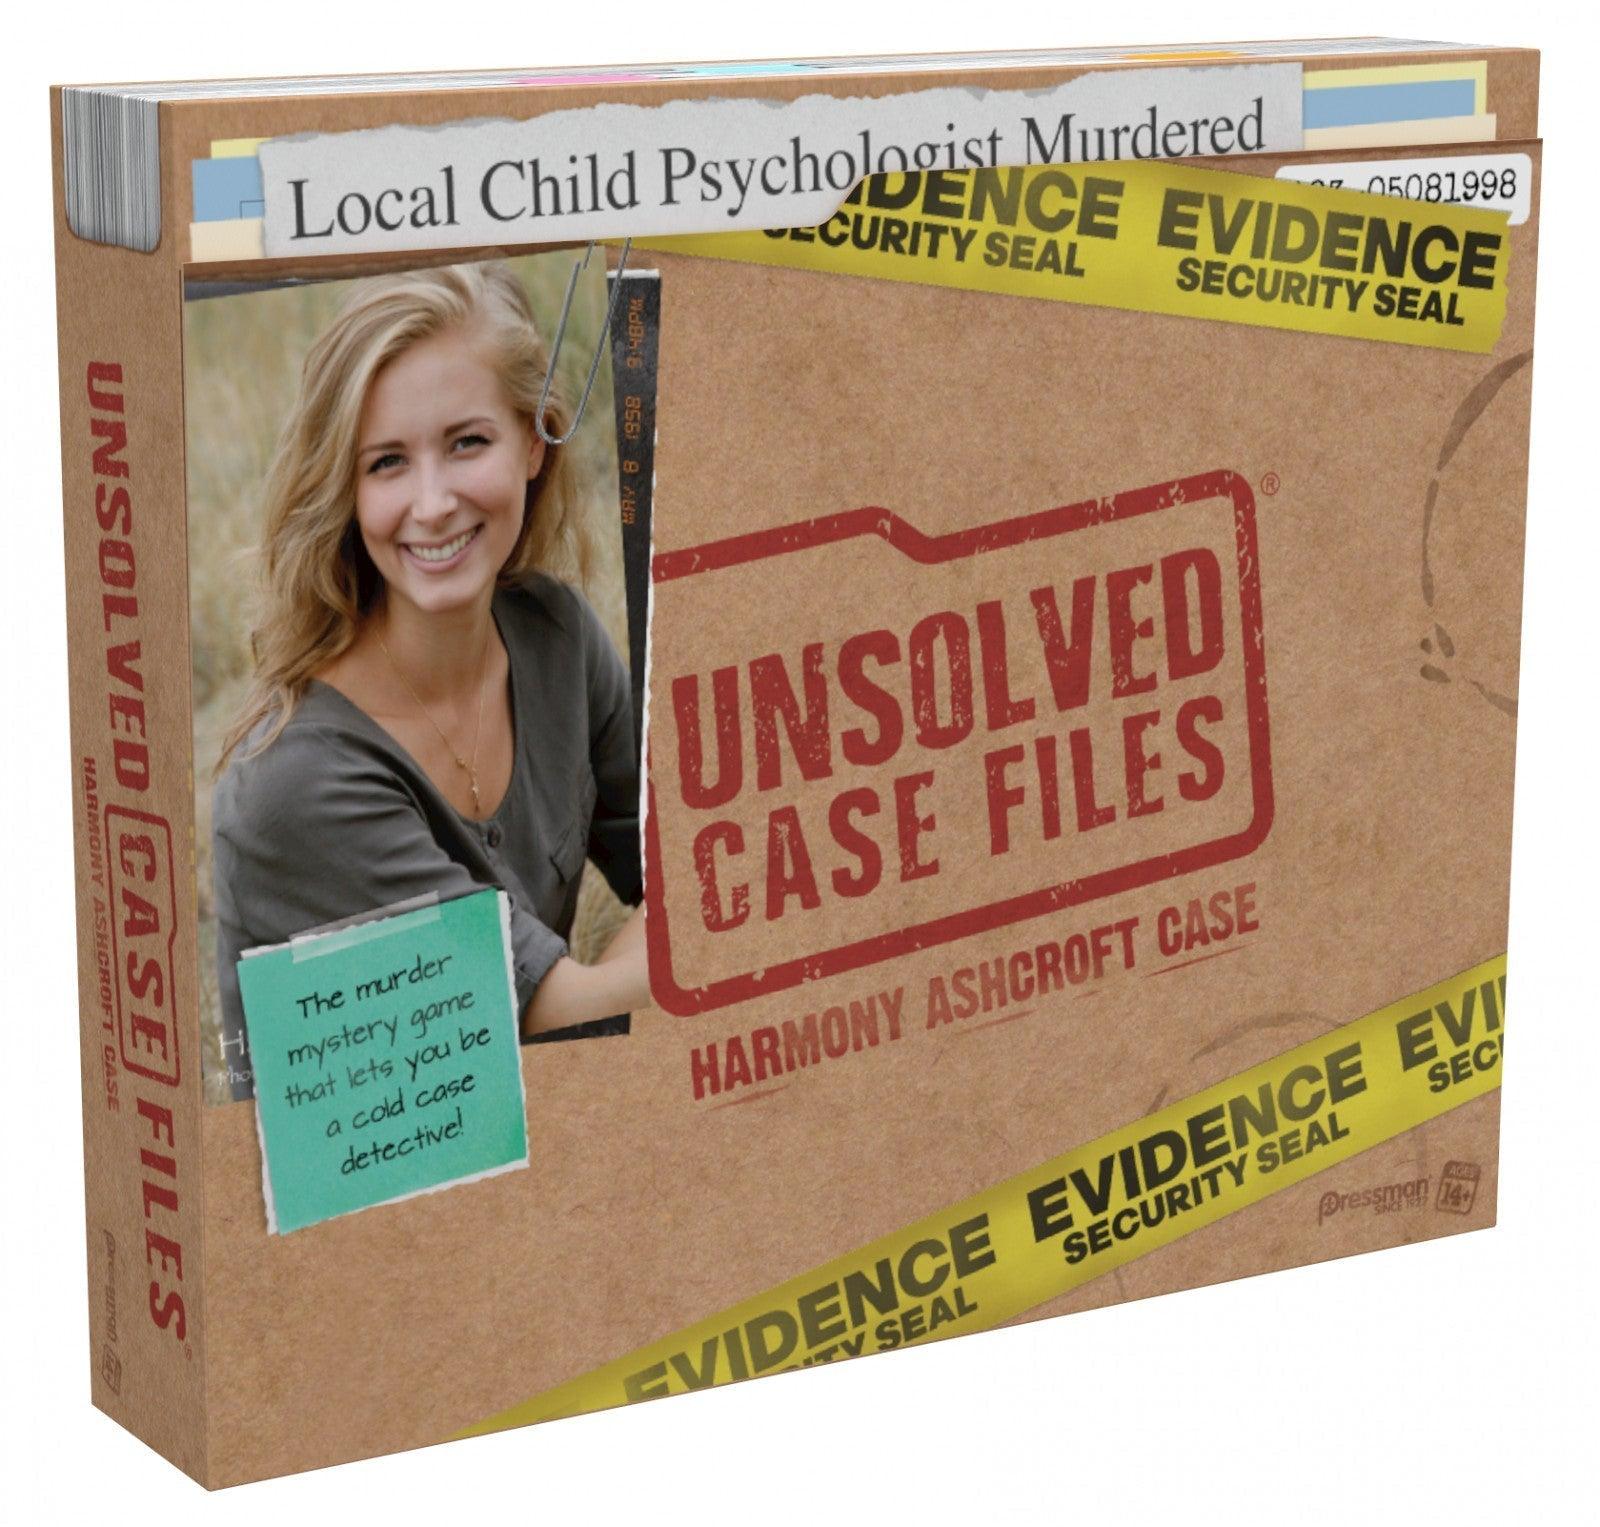 VR-82113 Unsolved Case Files Harmony Ashcroft - Crown & Andrews - Titan Pop Culture